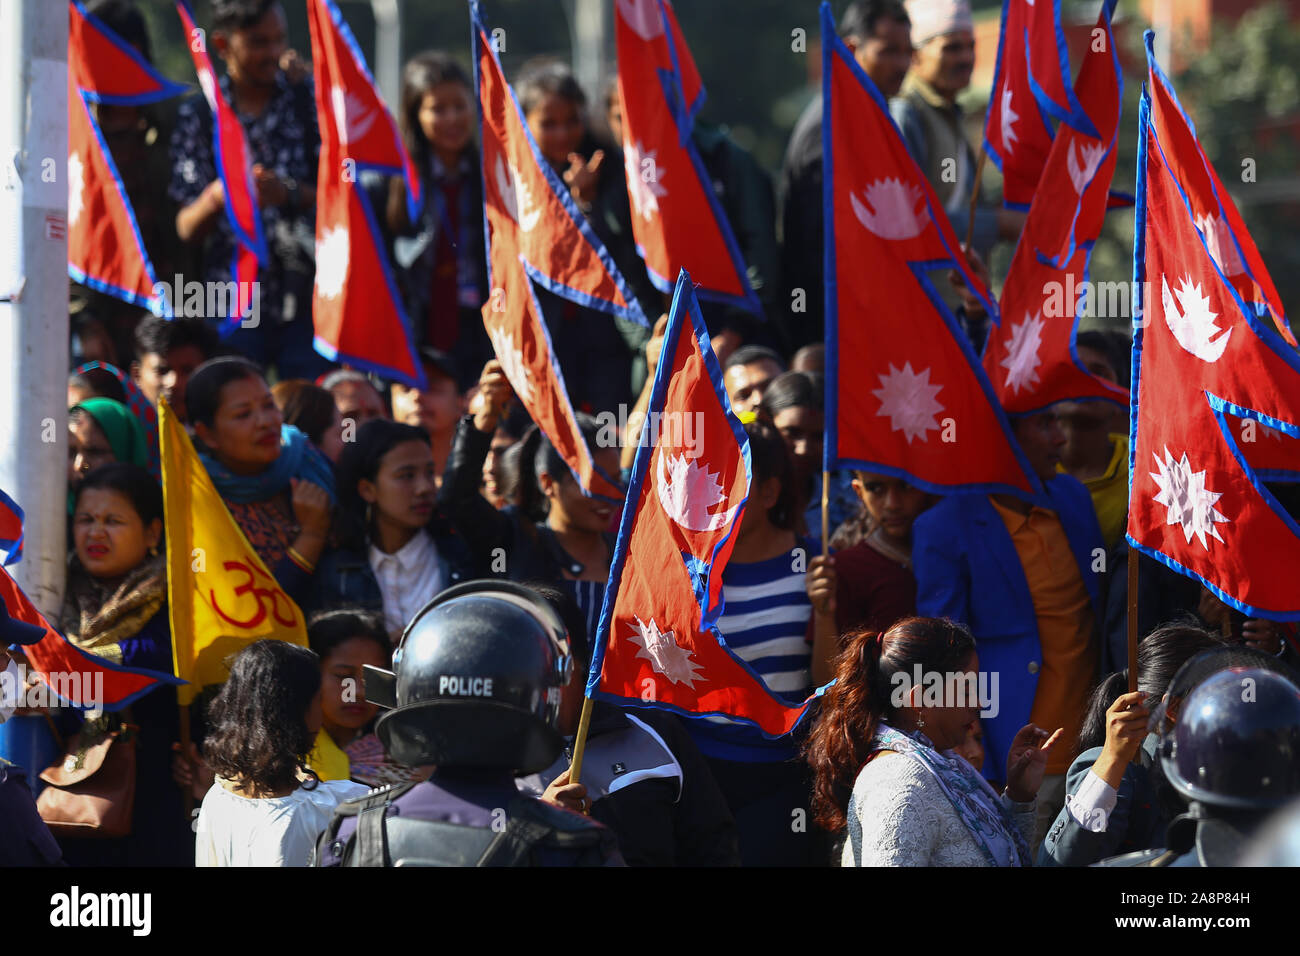 Nepalese wave flags during an anti-India protest.Hundreds of Nepalese including students, gathered to protest against new India political map released which includes the Nepals land Kalapani and Lipulek as part of the Indian Territory. Stock Photo